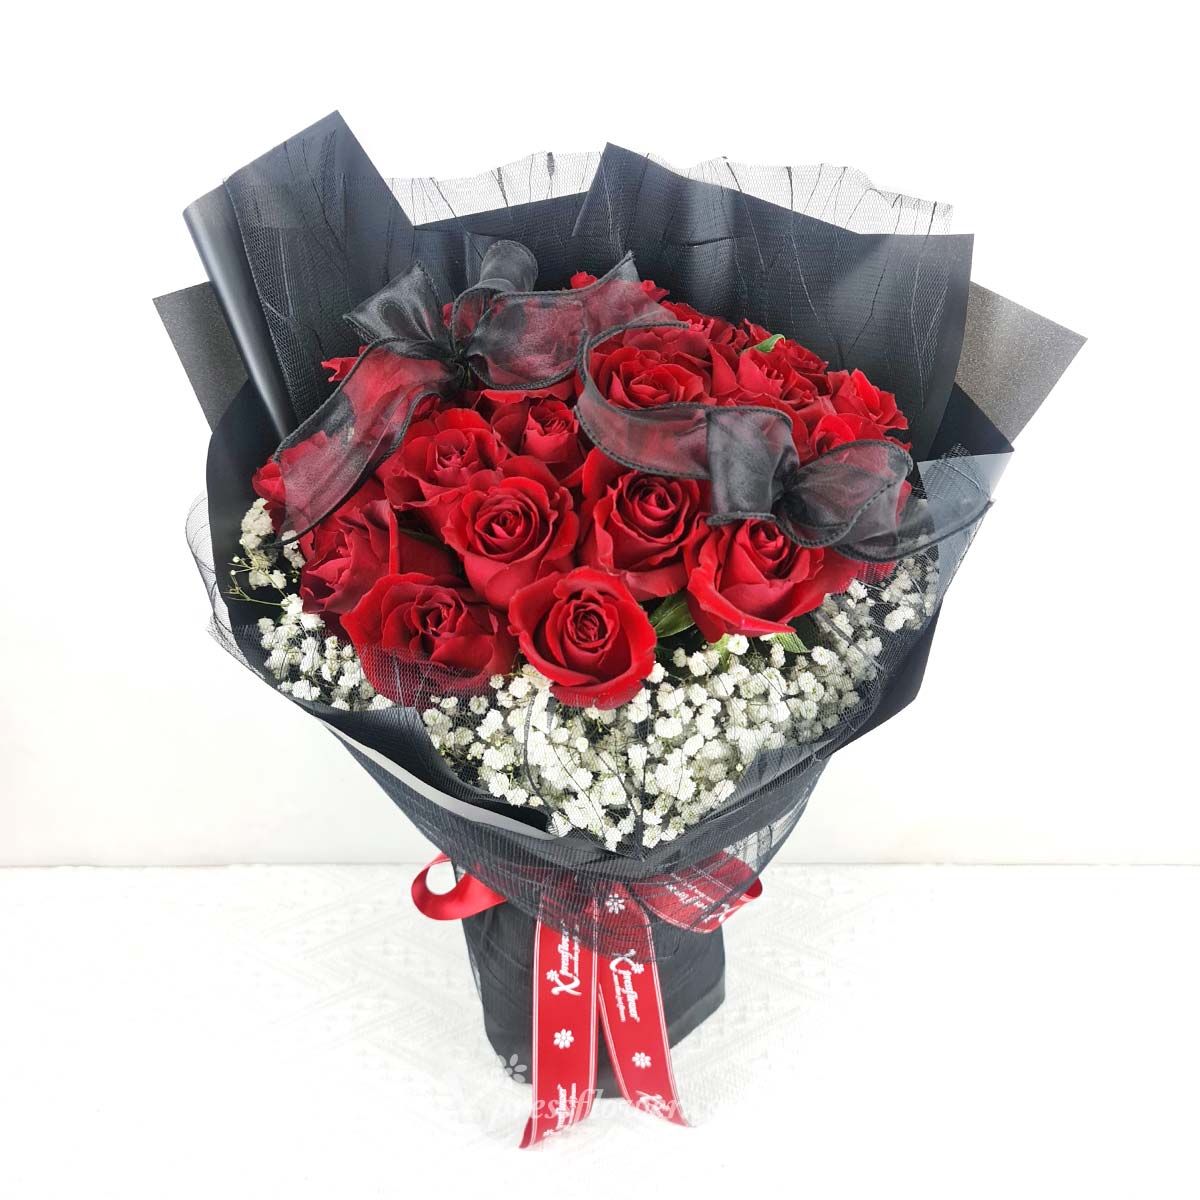 VDBQ2413_Cupids Bouquet 24 Red Roses_1B